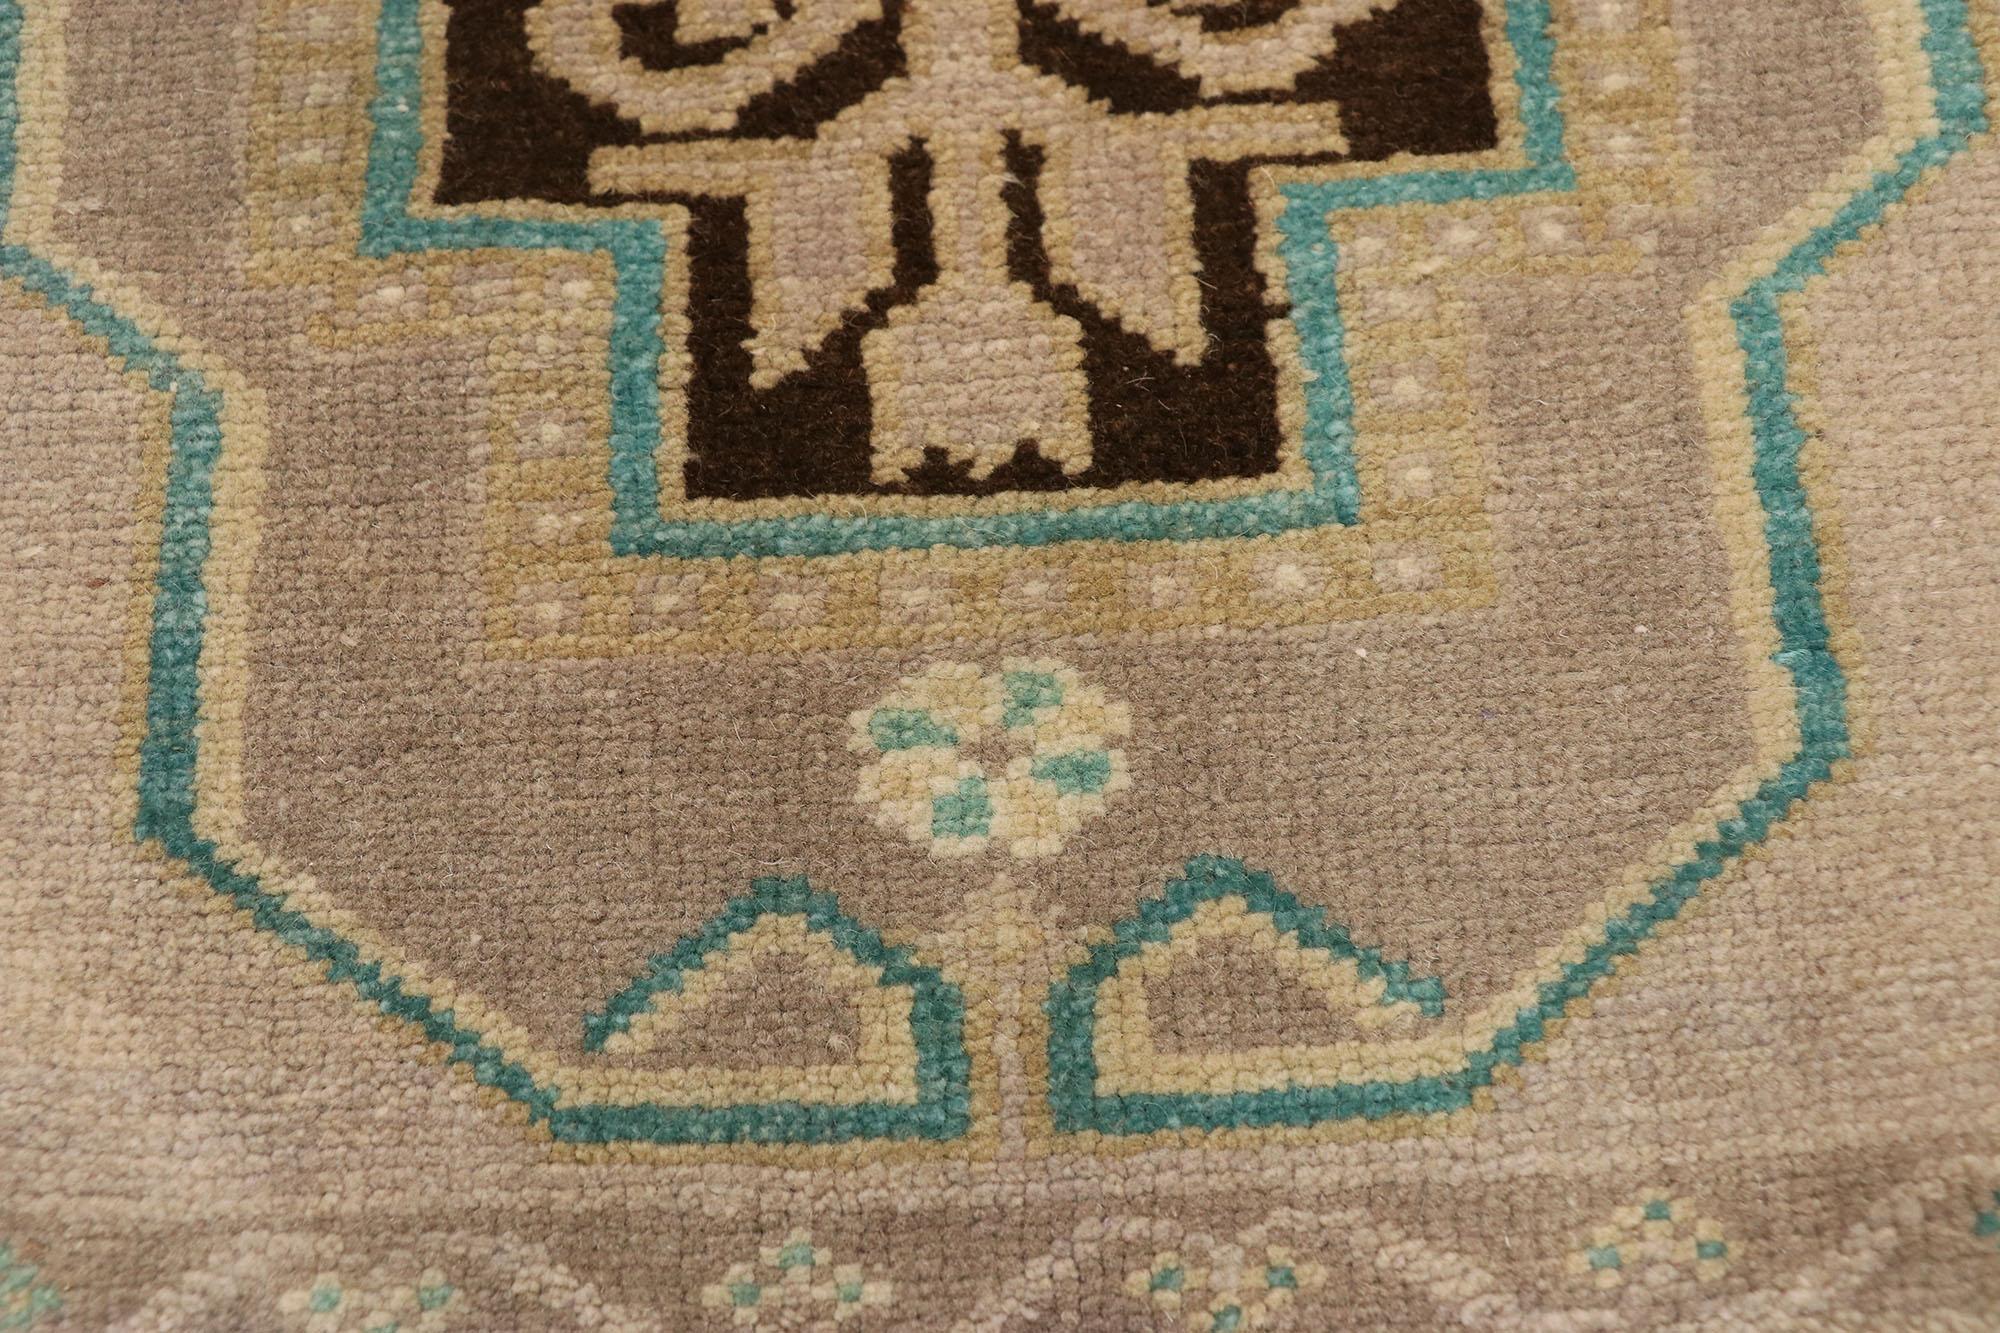 Vintage Turkish Oushak Yastik Scatter Rug, Small Accent Rug In Good Condition For Sale In Dallas, TX